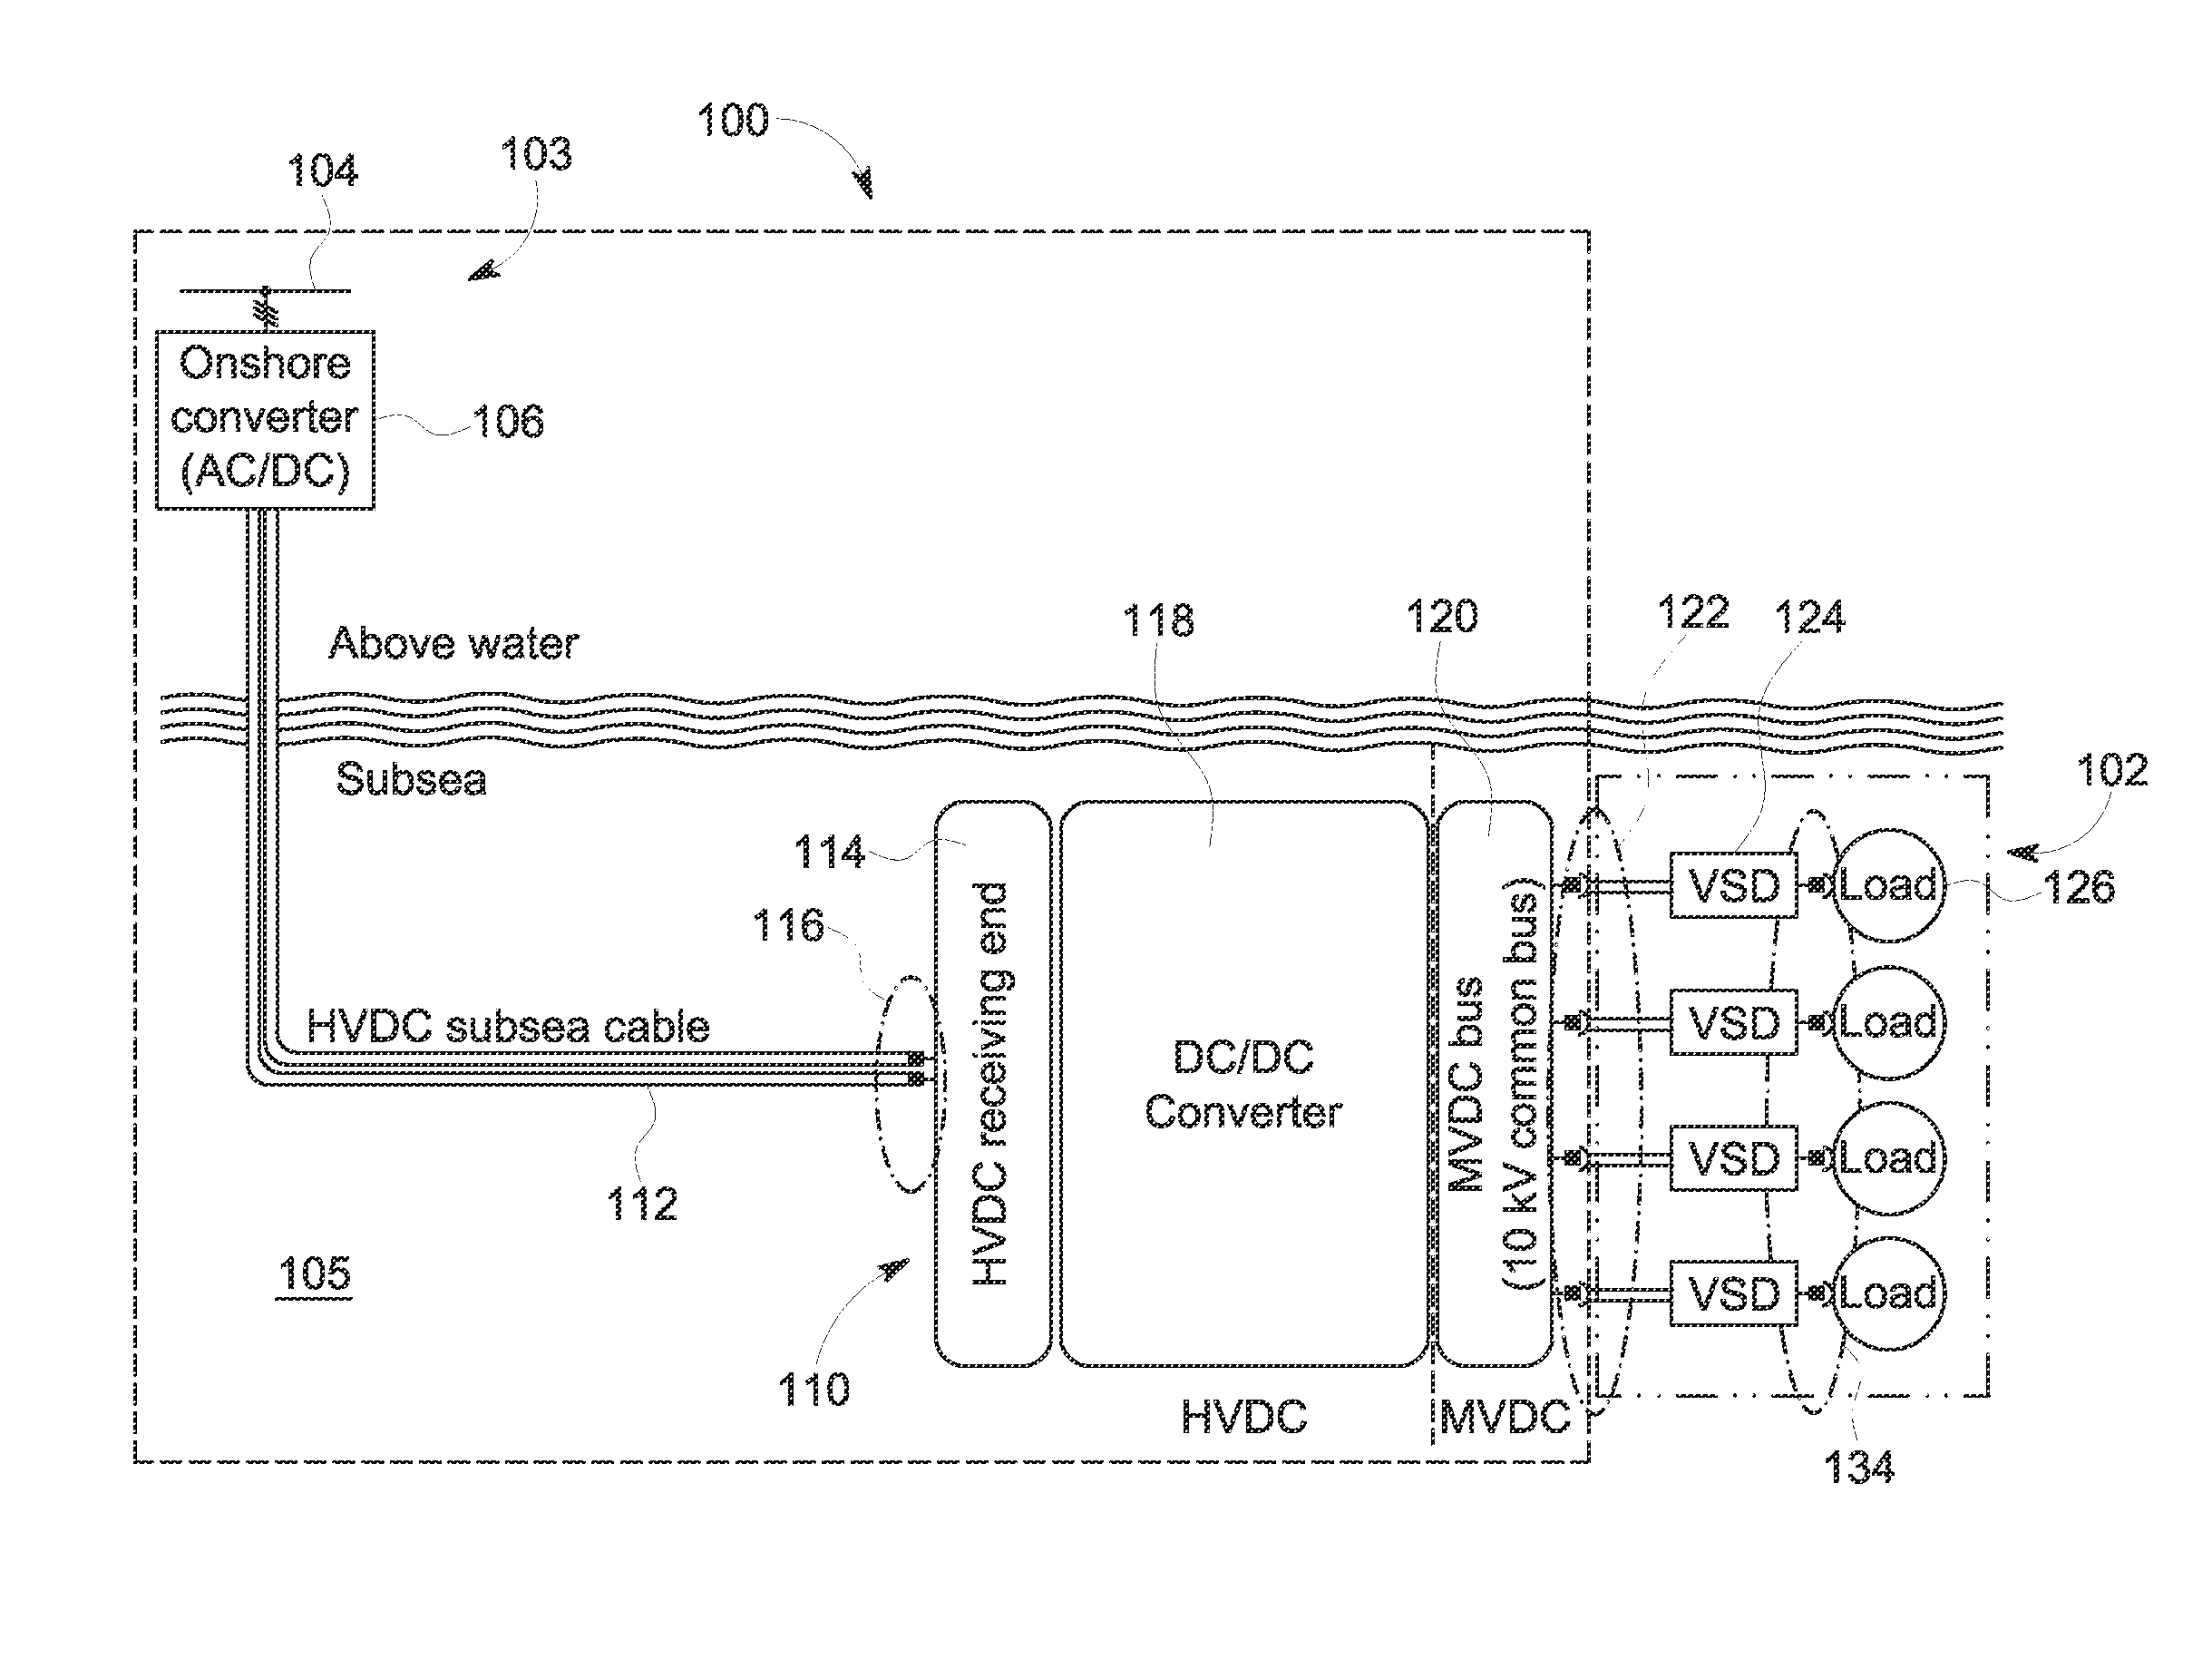 Submersible power distribution system and methods of assembly thereof